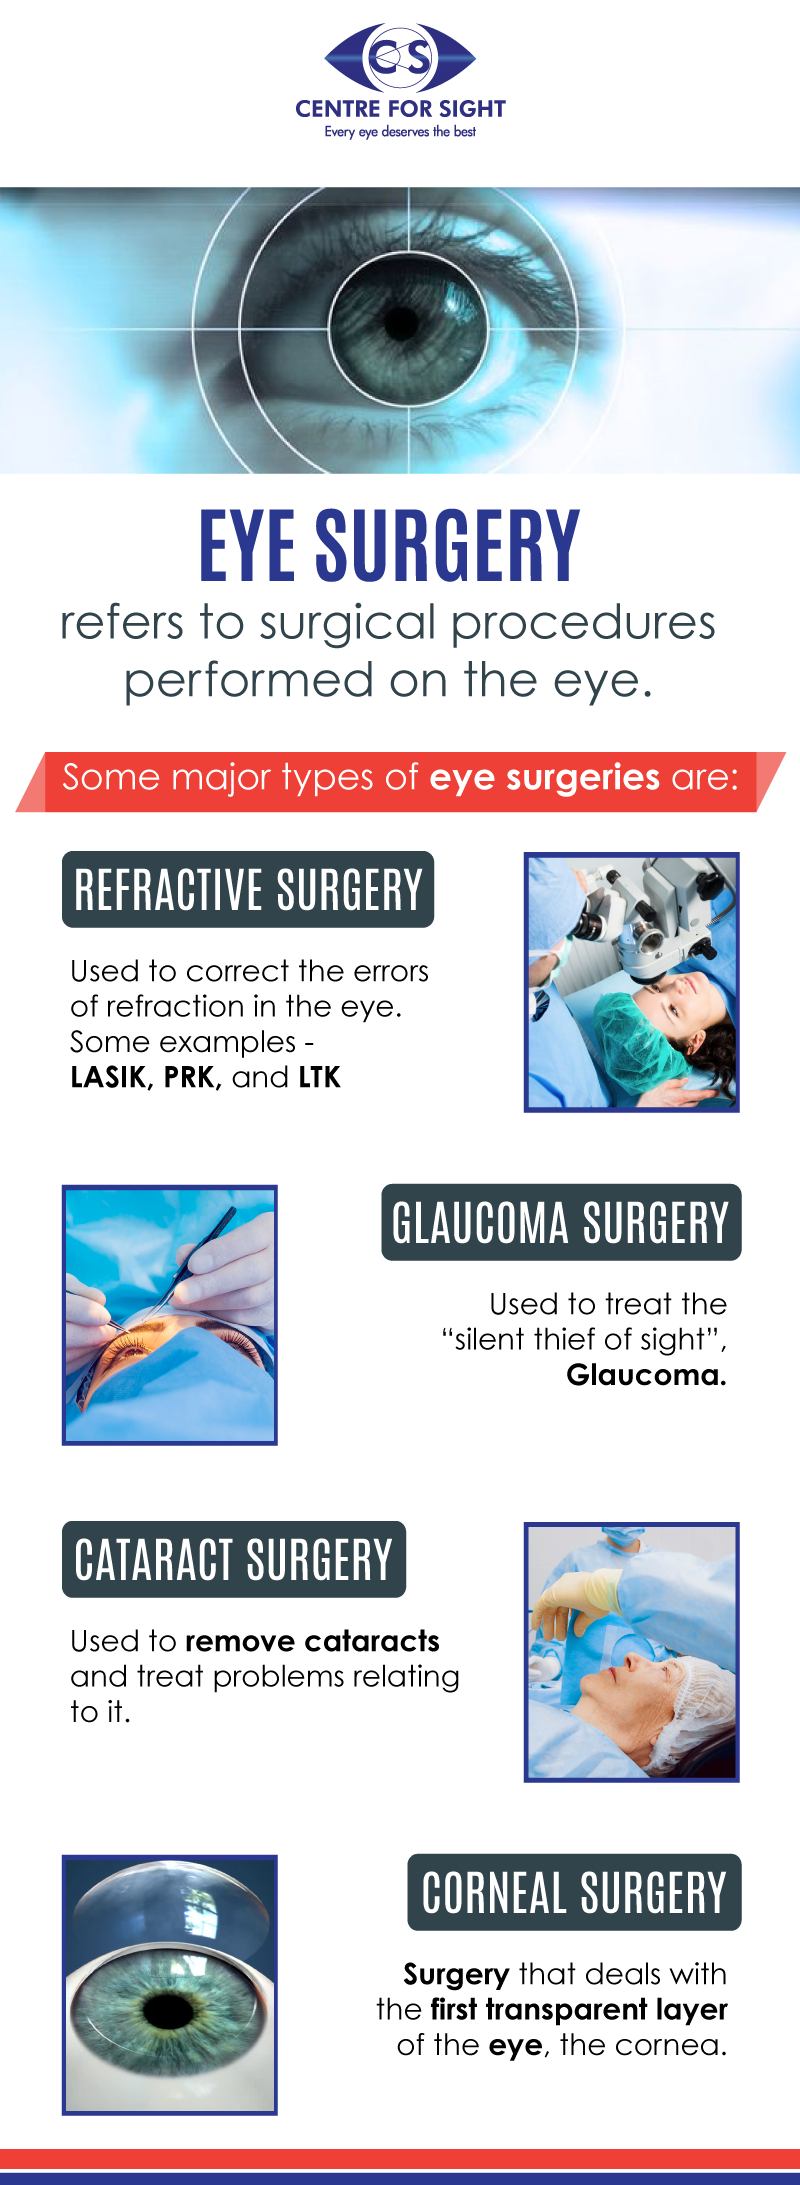 Eye Surgery Eye surgery refers to surgical procedures performed on the eye. Some major types of eye surgeries at right here.
 by centreforsight